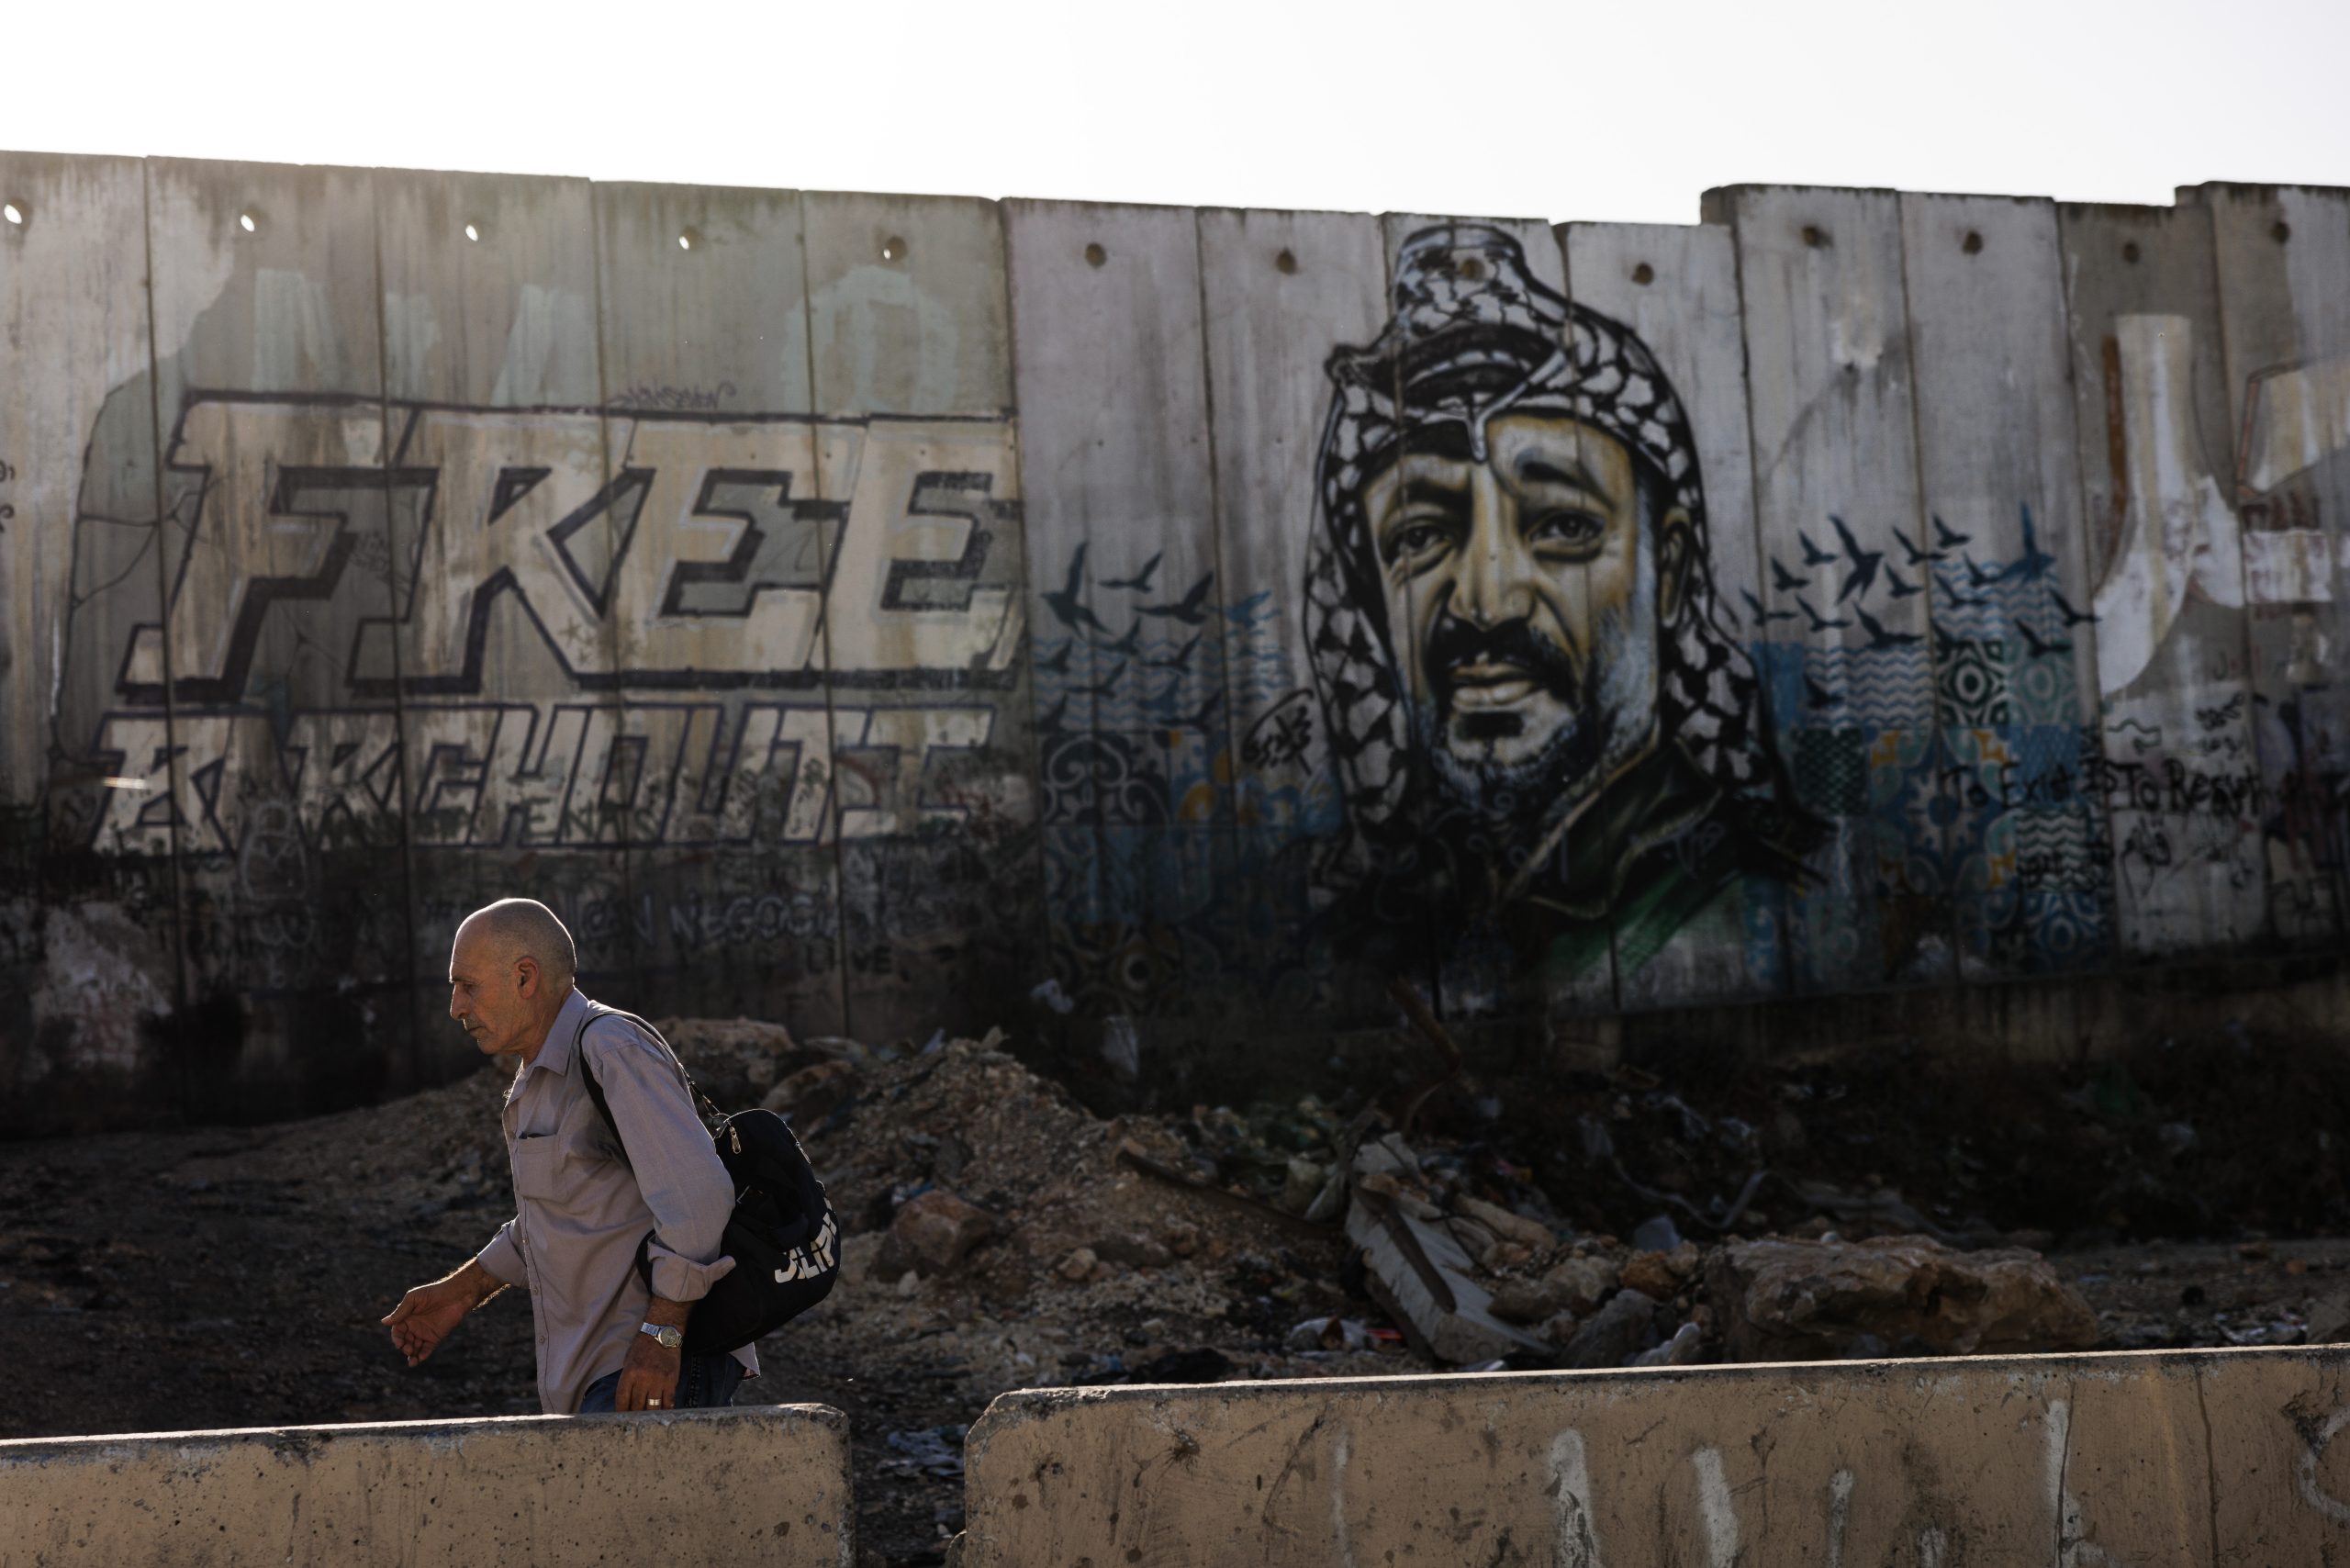 A mural on Israel's controversial separation wall between Jerusalem and Ramallah depicting the former chairman of the Palestine Liberation Organization, Yasser Arafat, in November 2023 in Ramallah, West Bank. Source: Dan Kitwood/Getty Images